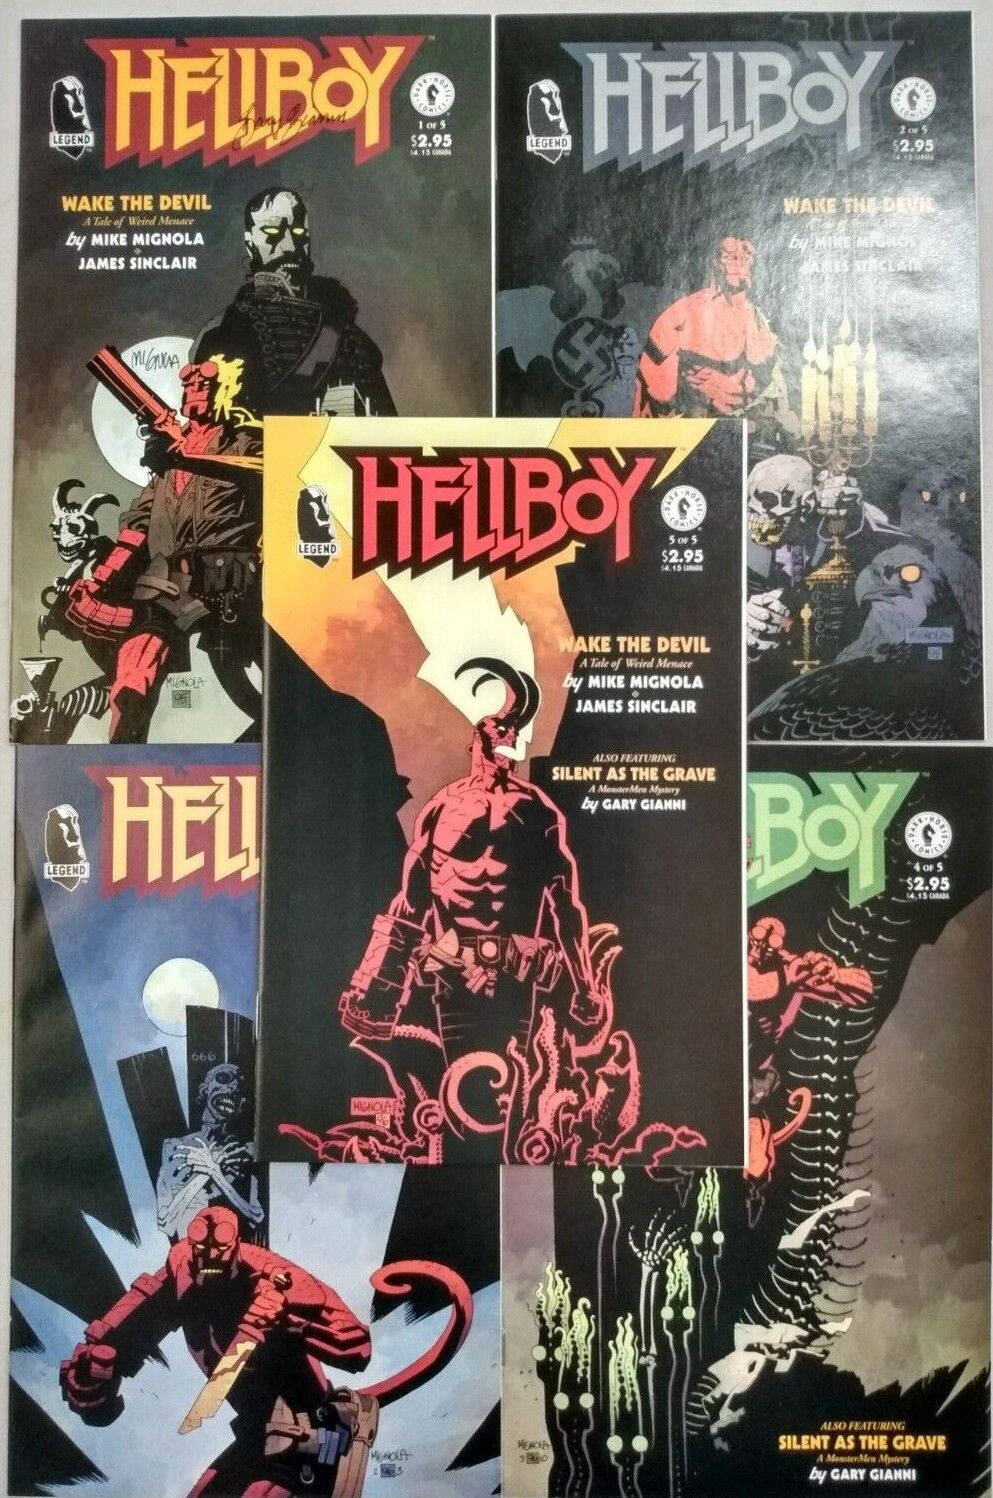 Hellboy: Wake the Devil #1-5 (#1 Signed by Gary Gianni & Mike Mignola) NM SET